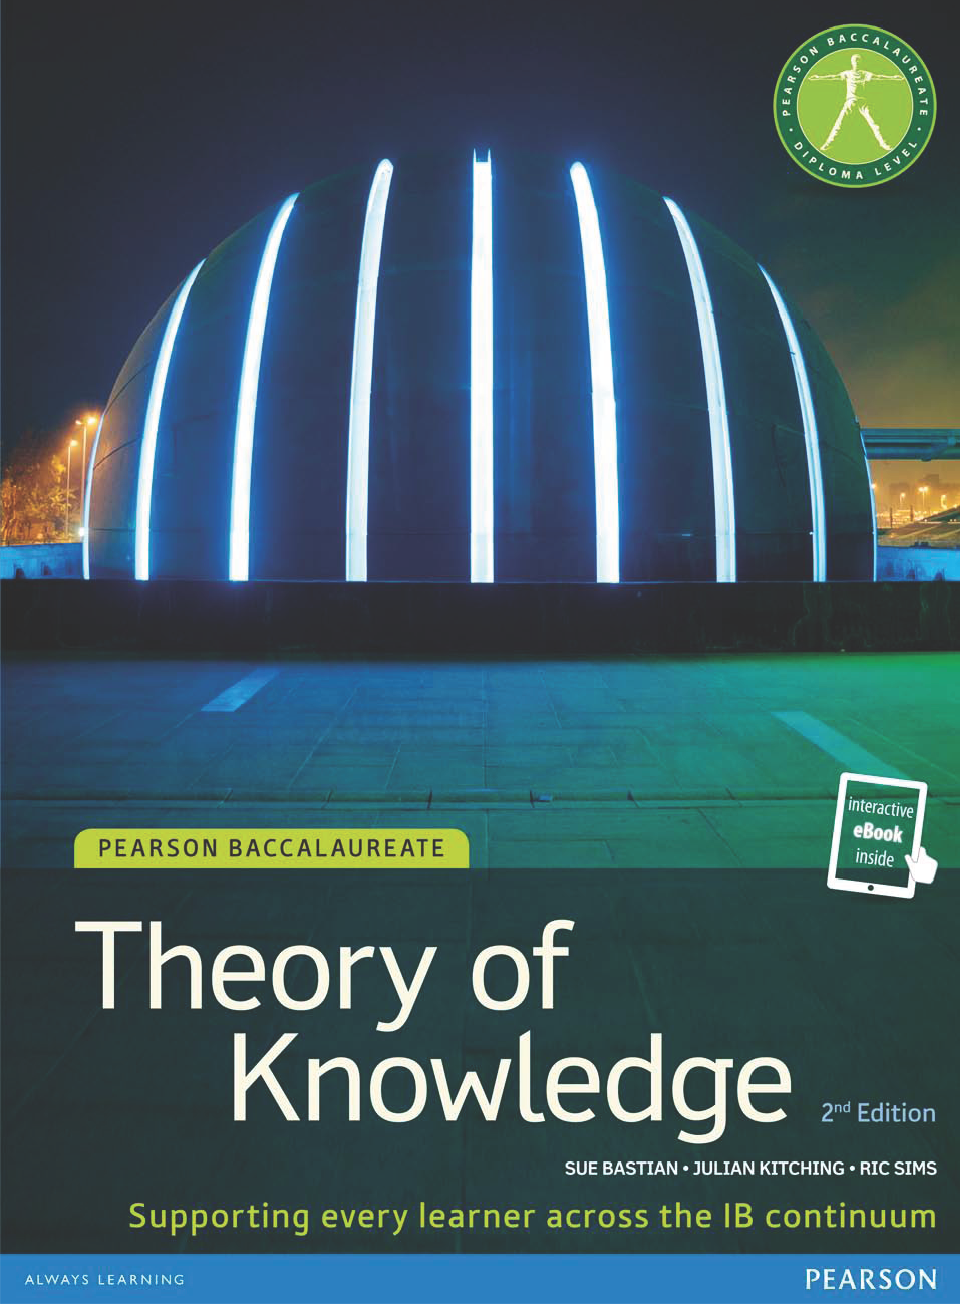 ib theory of knowledge essay questions quizlet